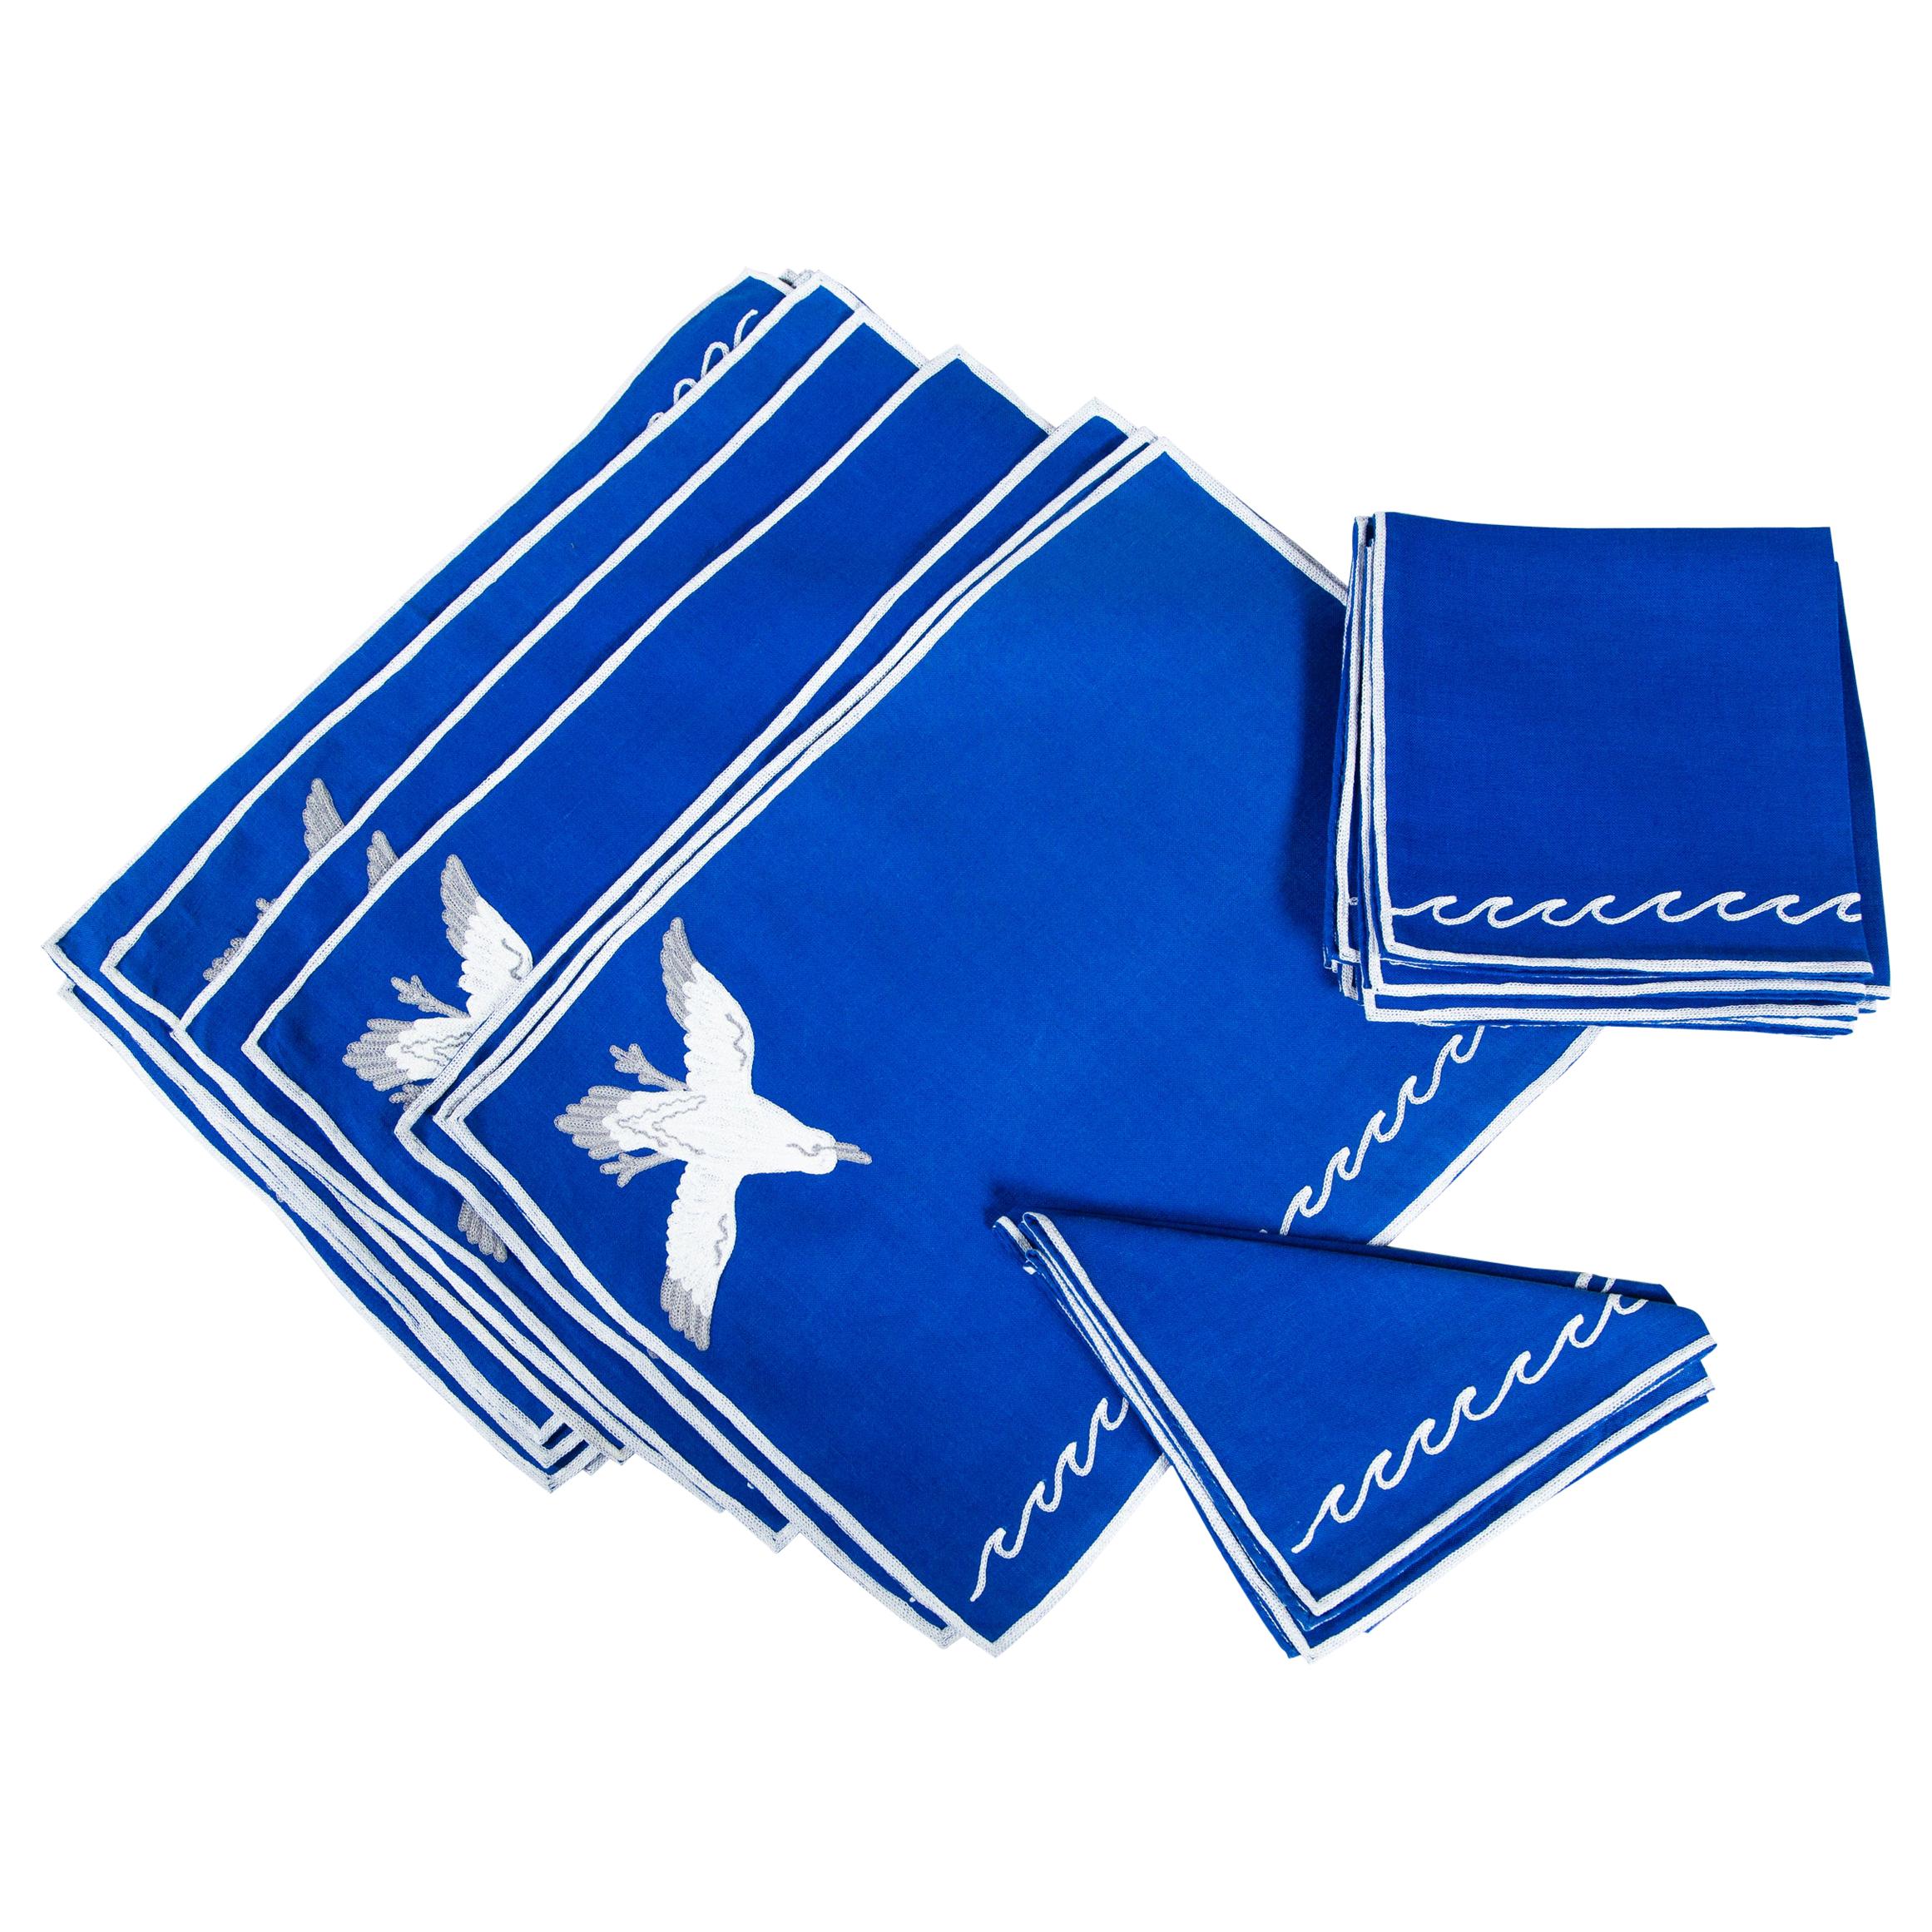 Placemats/Napkins with Sea Motif For Sale